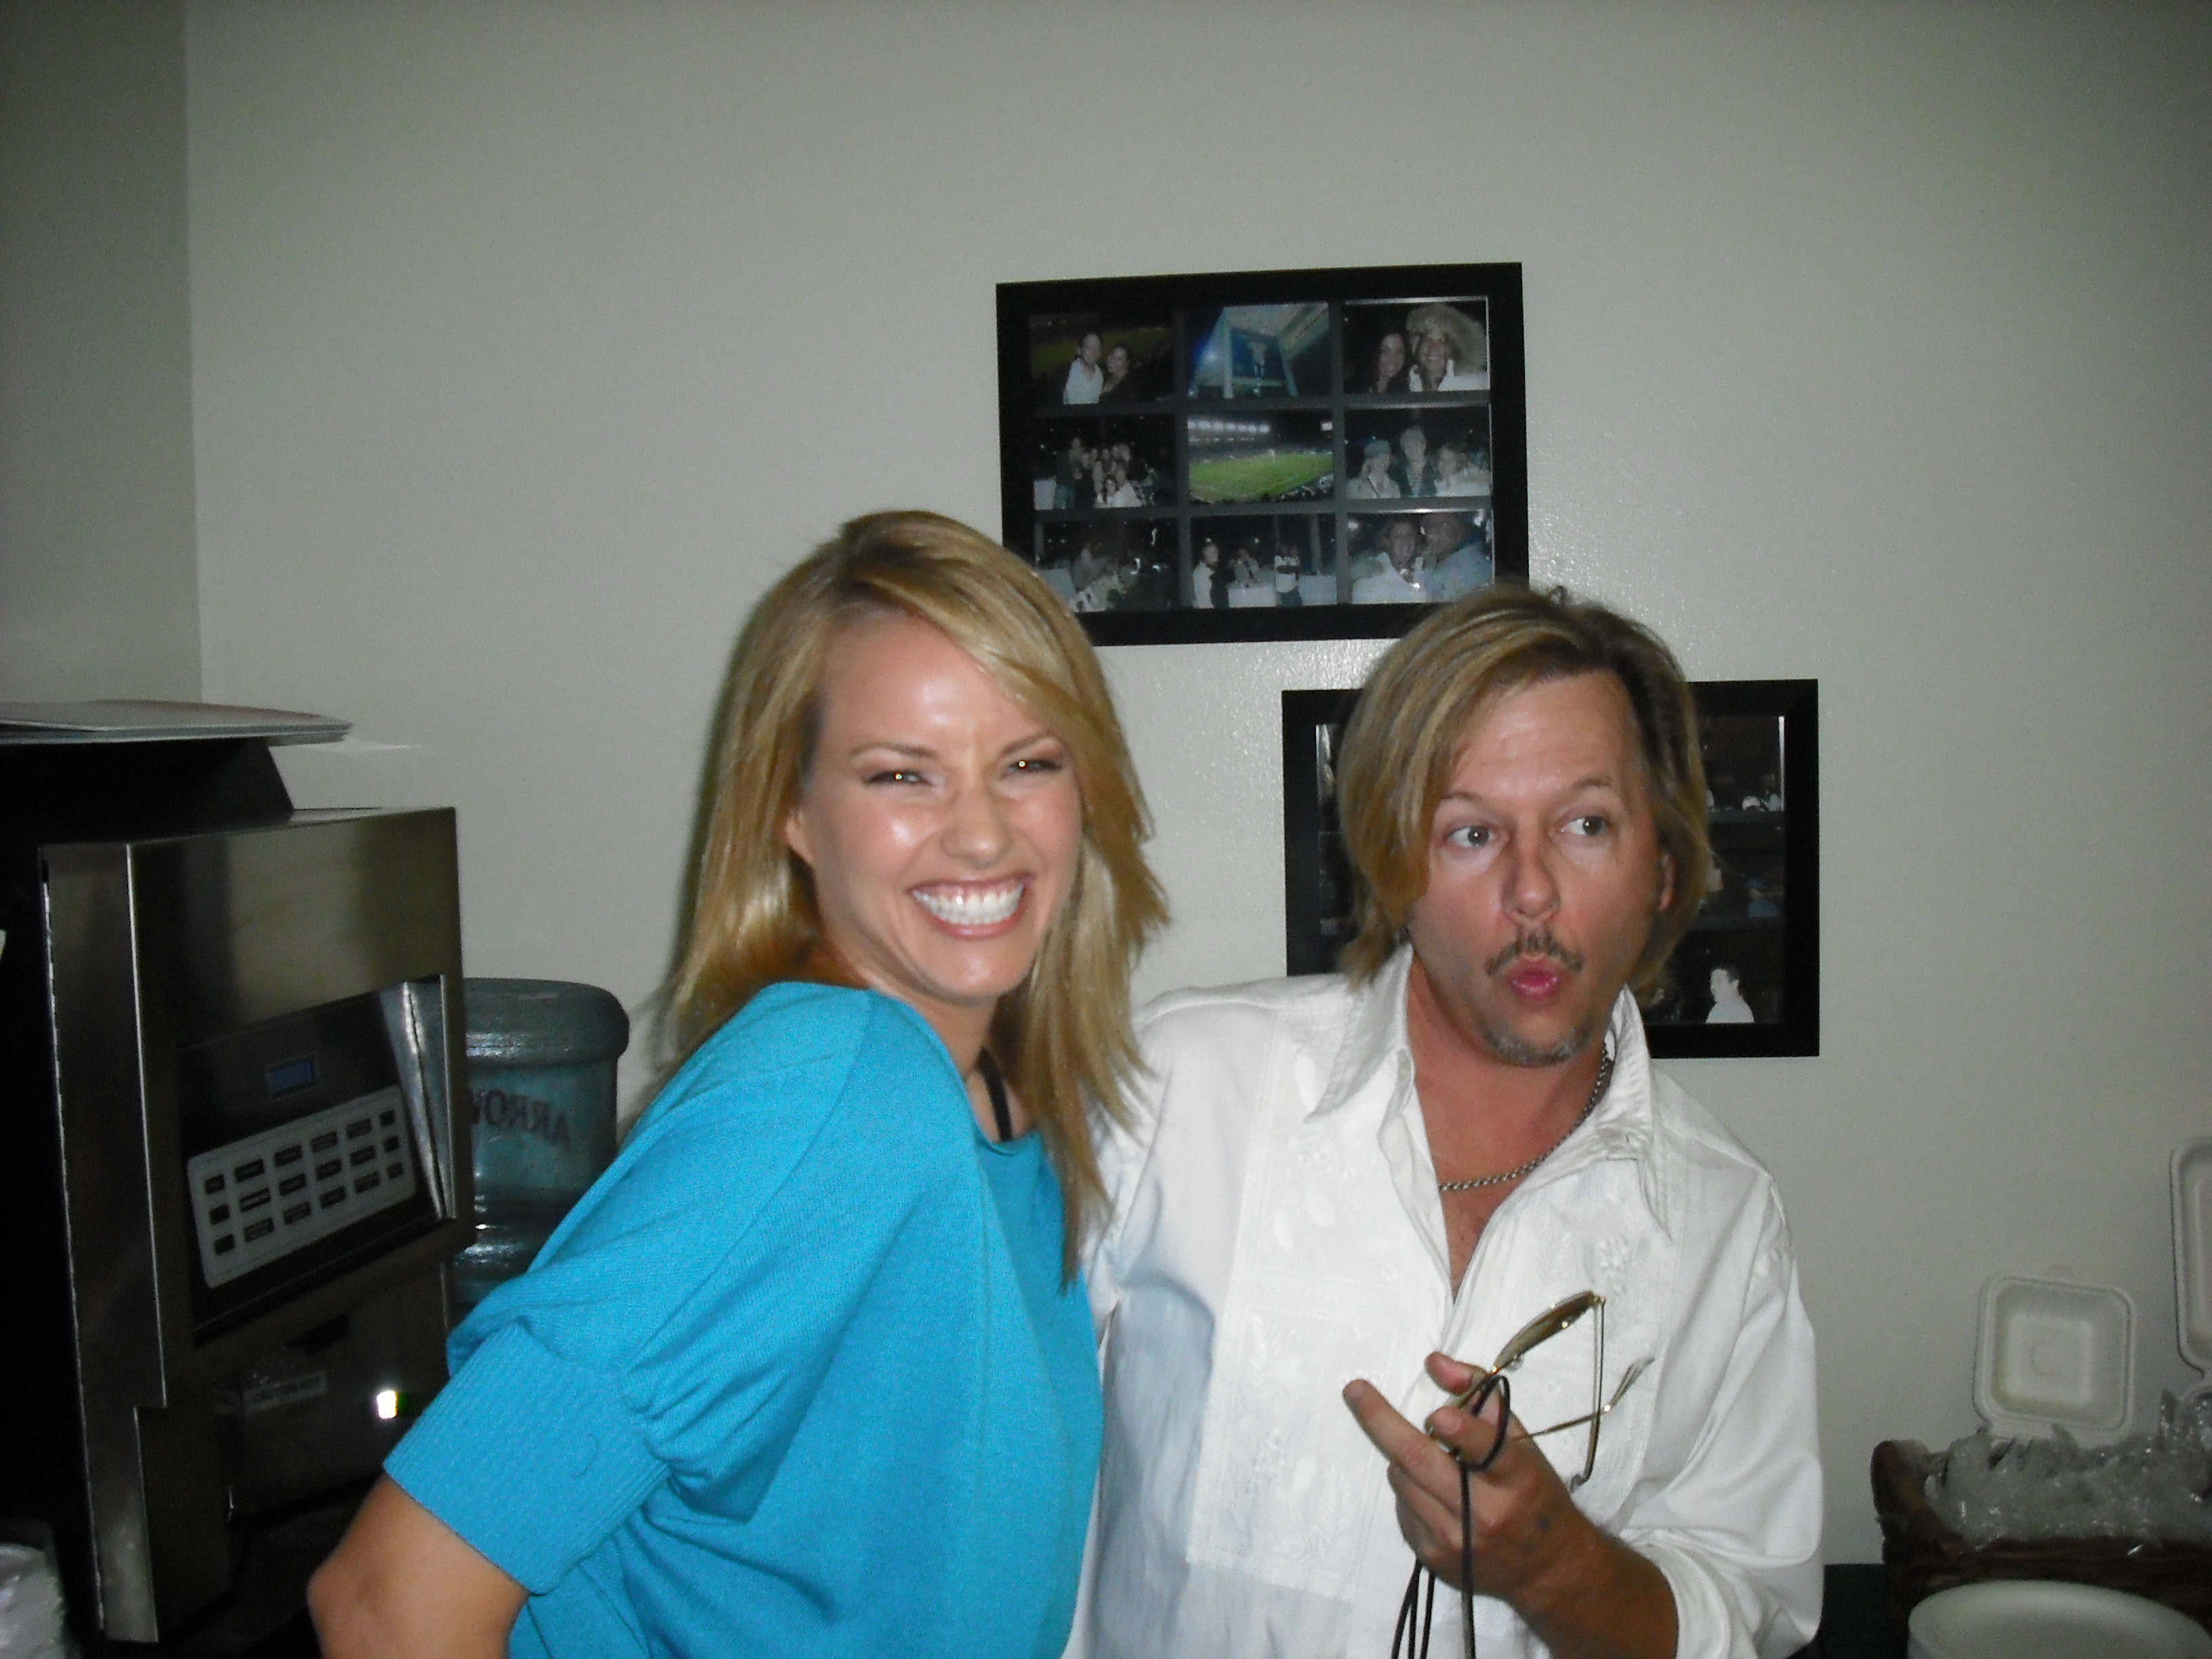 Me with David Spade on the set of Rules of Engagement